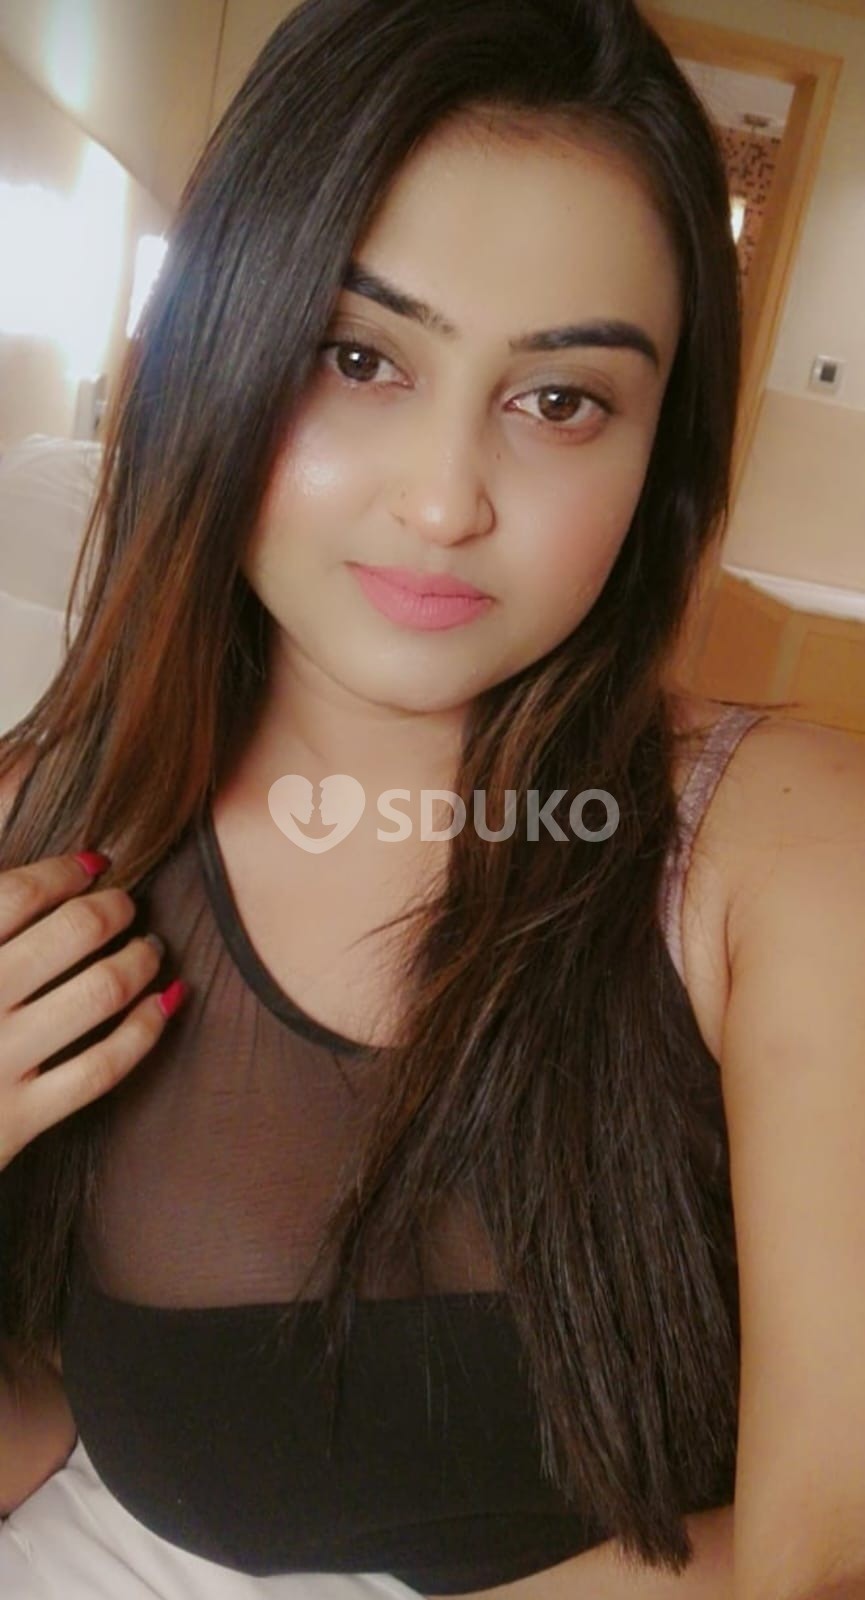 Thane Vashi Excellent Mature Call Girl Unforgettable Sex-Service All Style Full Satisfaction Hotel And Home Service 24Hr